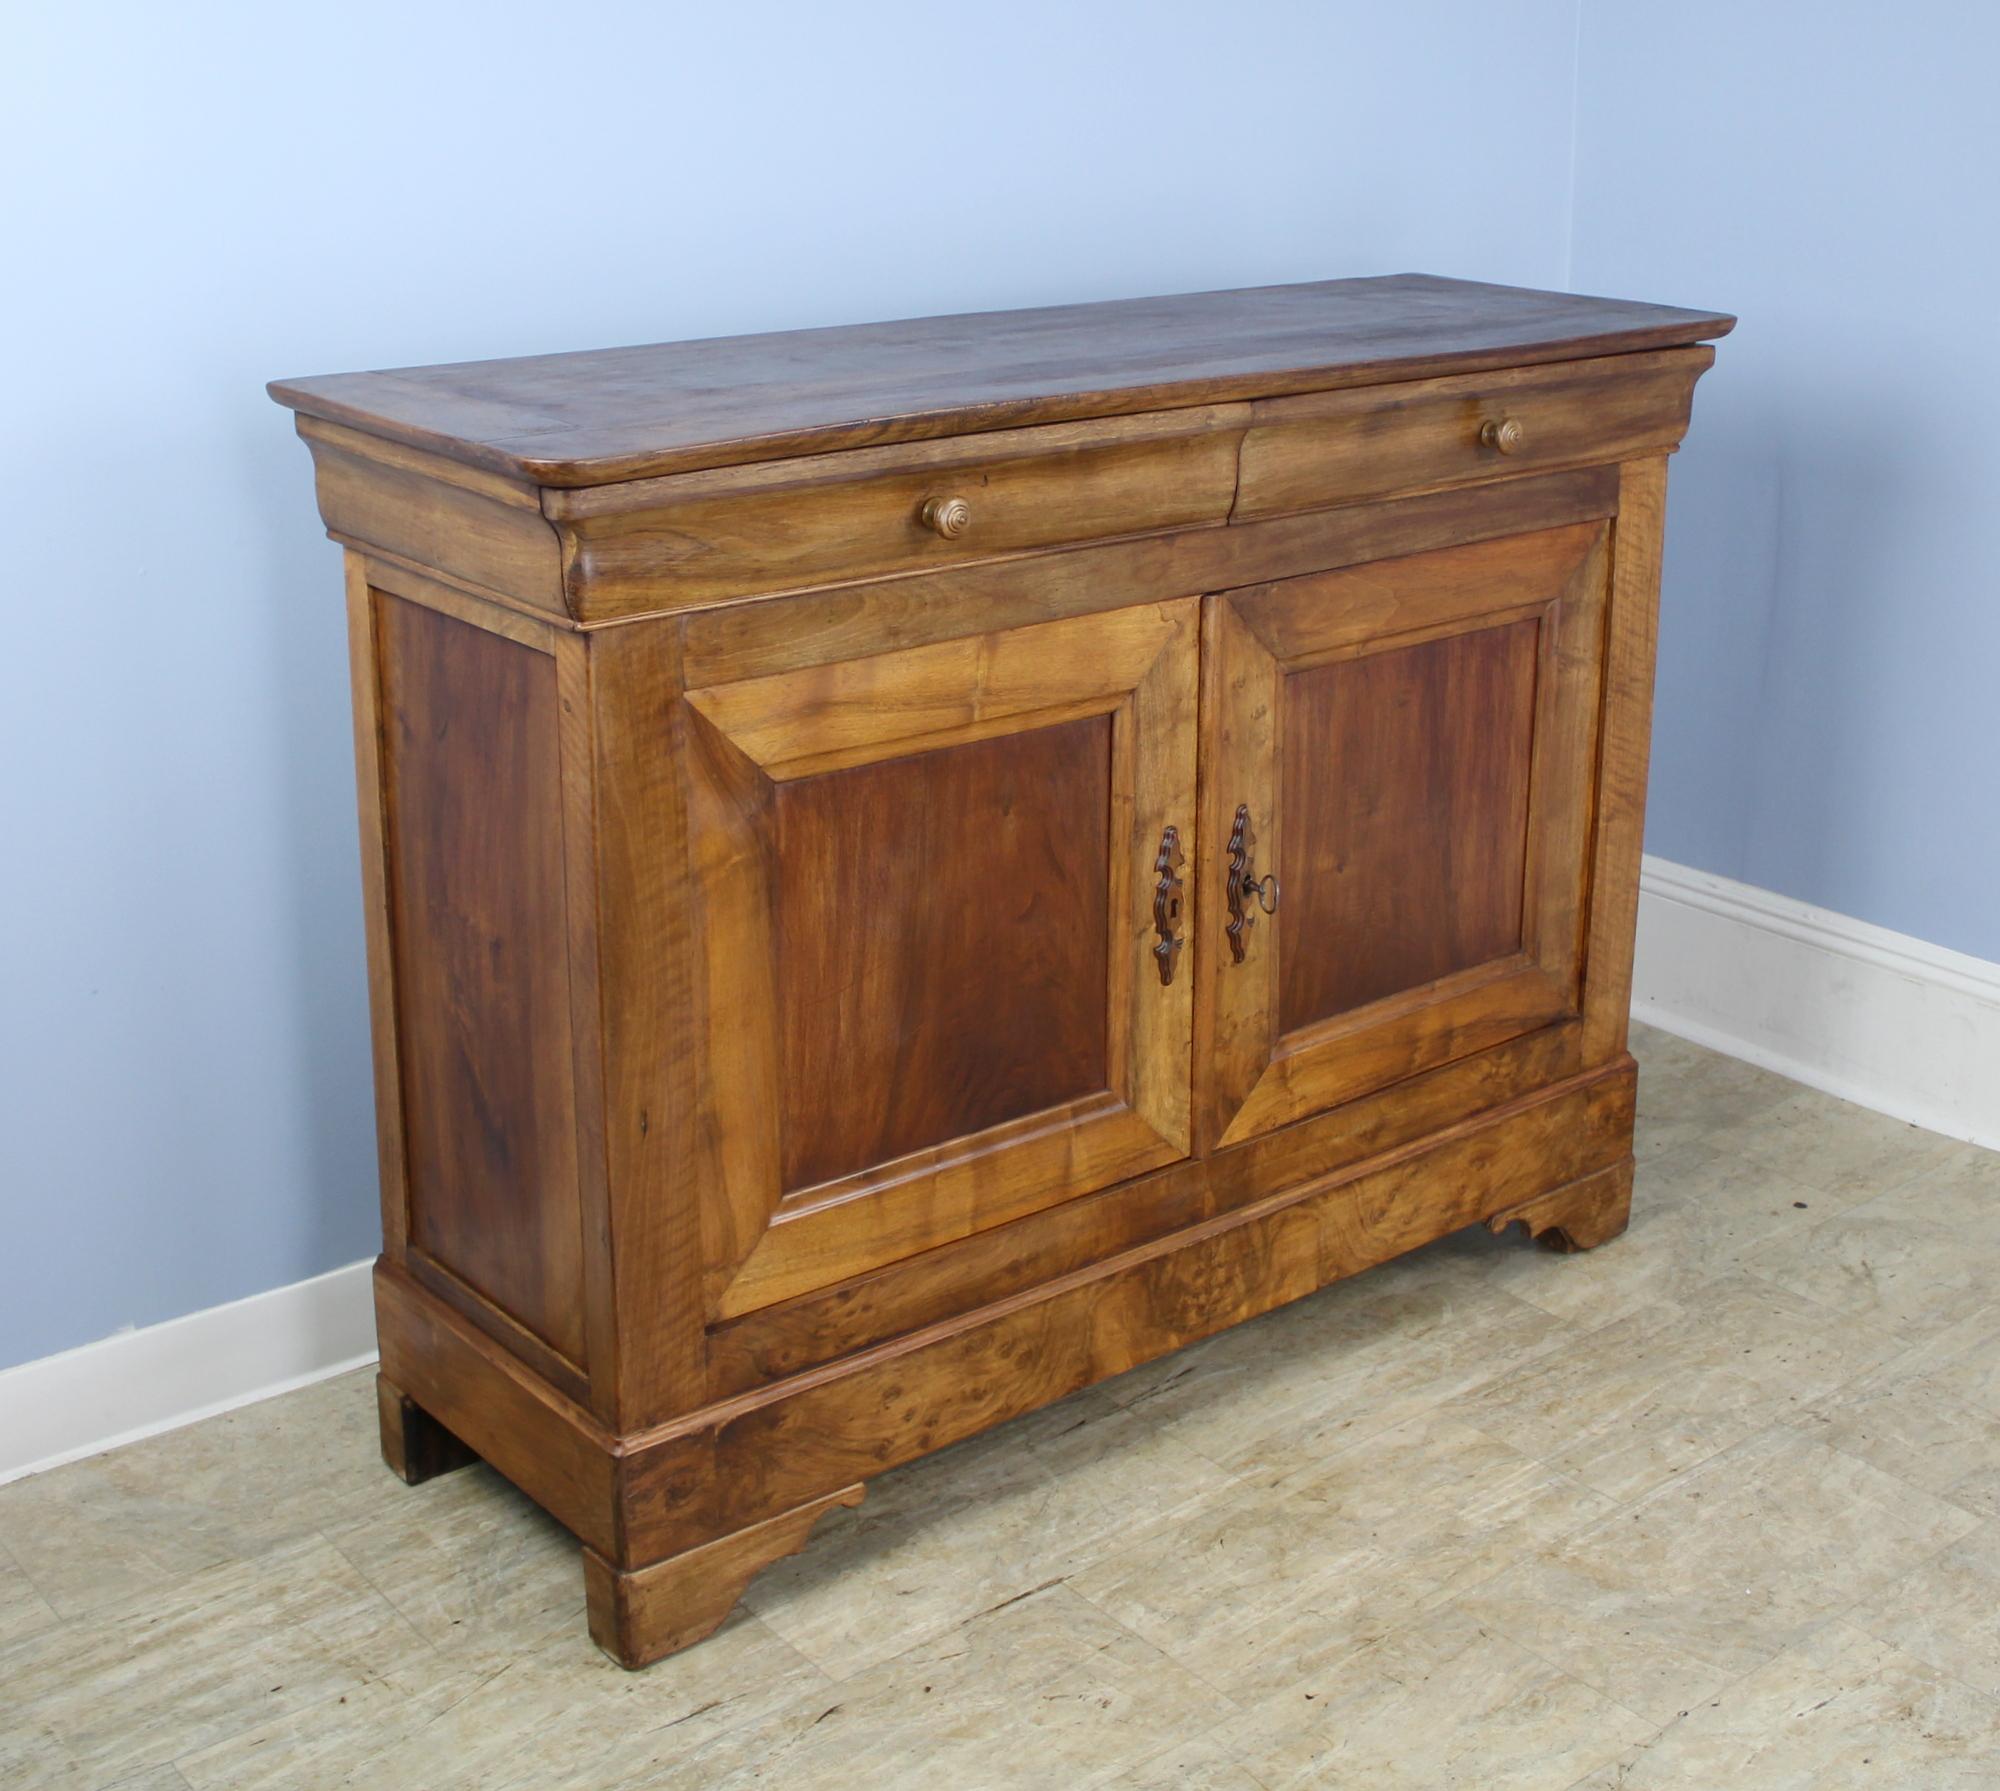 Stunning buffet, two doors and two drawers above, Classic Louis Philippe style. The walnut grain is as good as it gets and the dimensions of the console are excellent. Pretty top and stylized feet add a note of interest. We love the whimsical wooden